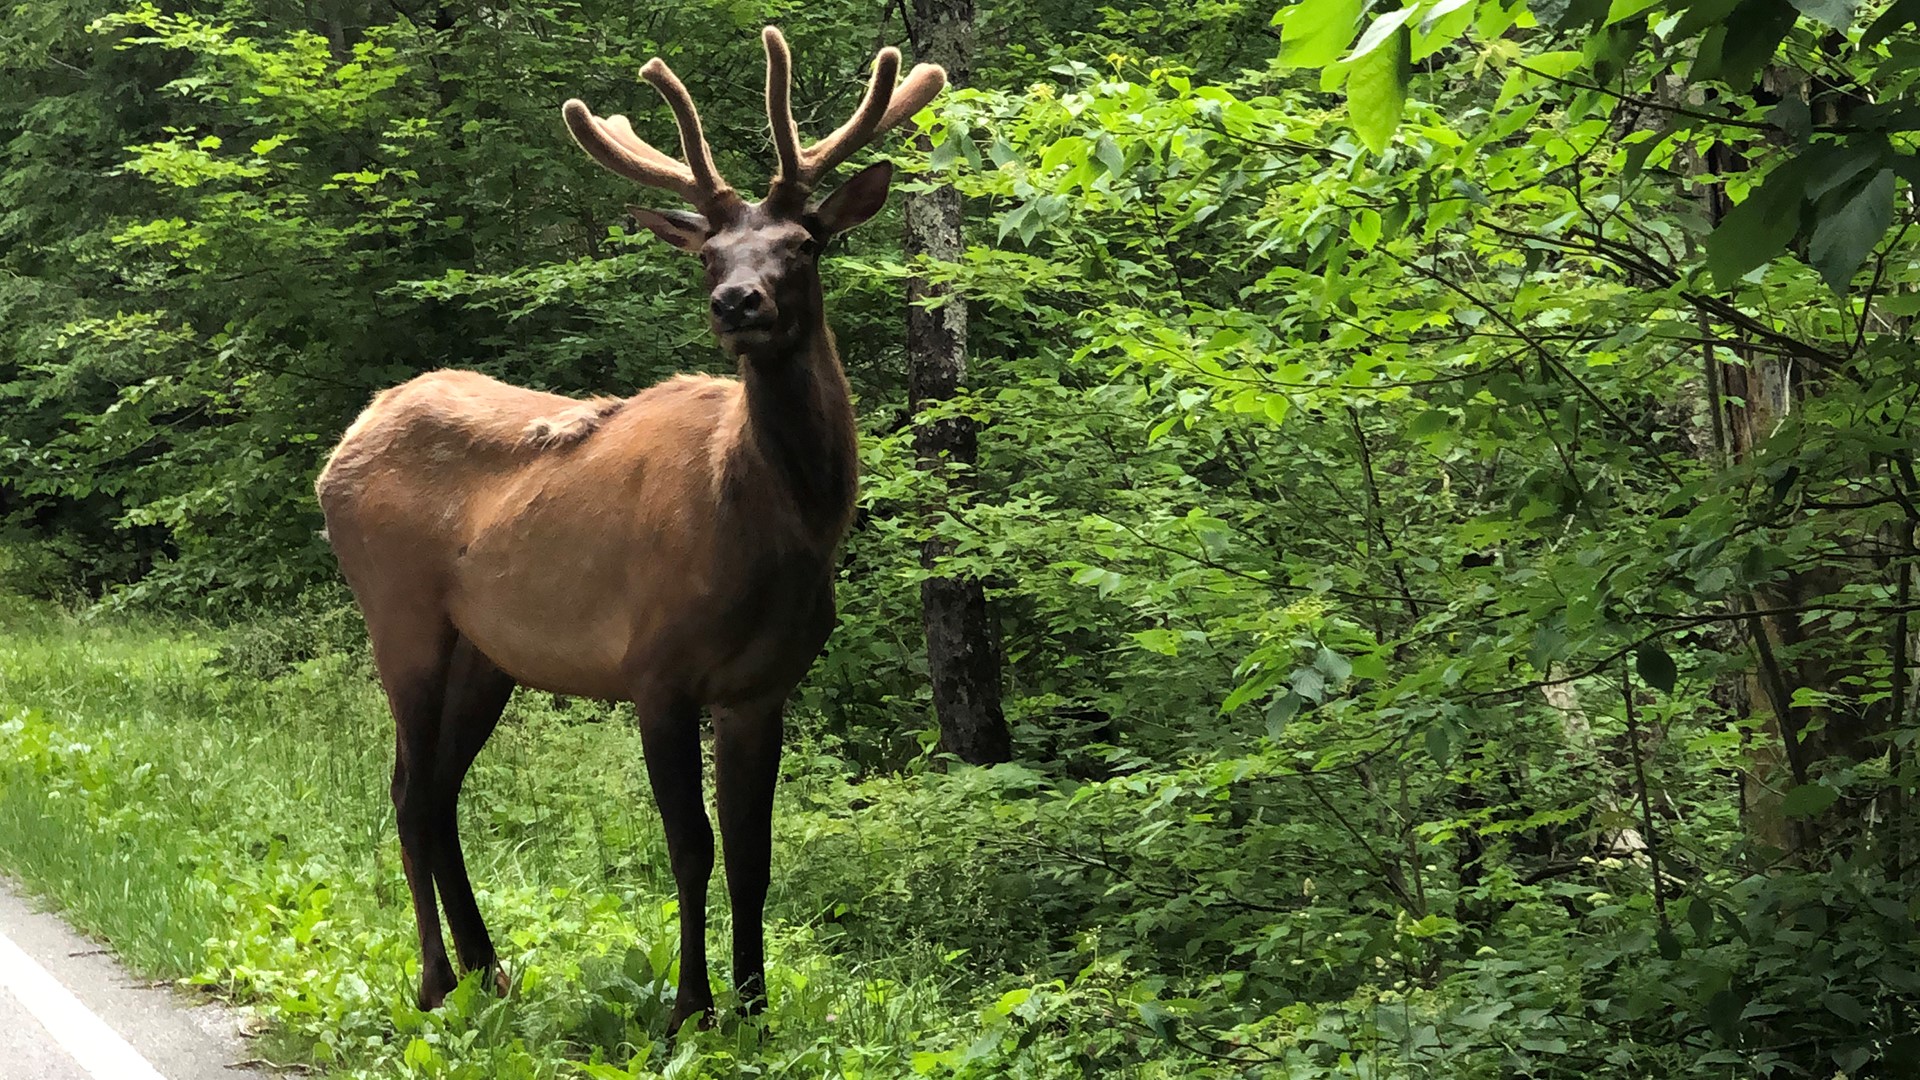 This confirms elk are in Tennessee's future.